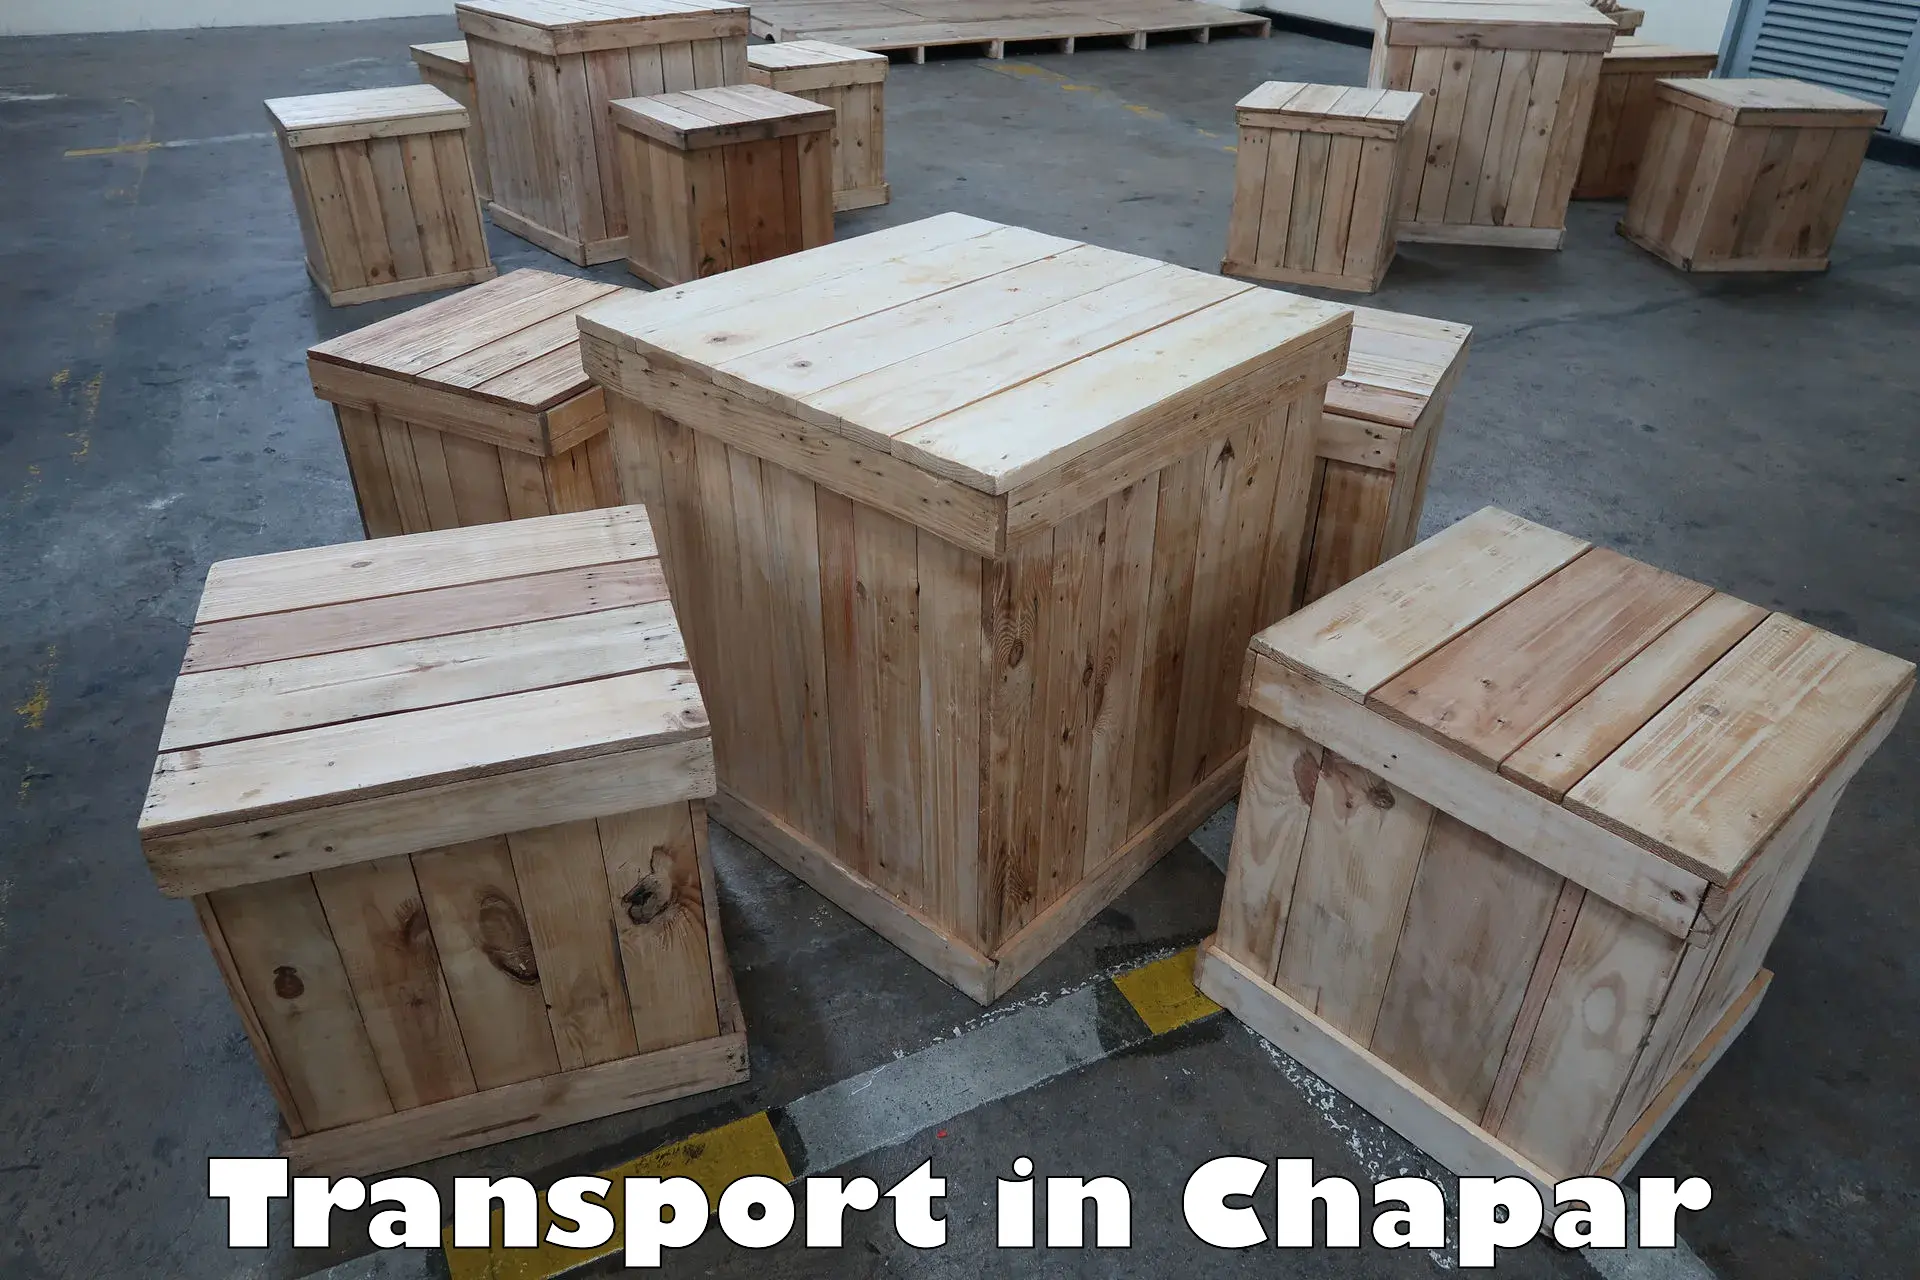 Daily transport service in Chapar